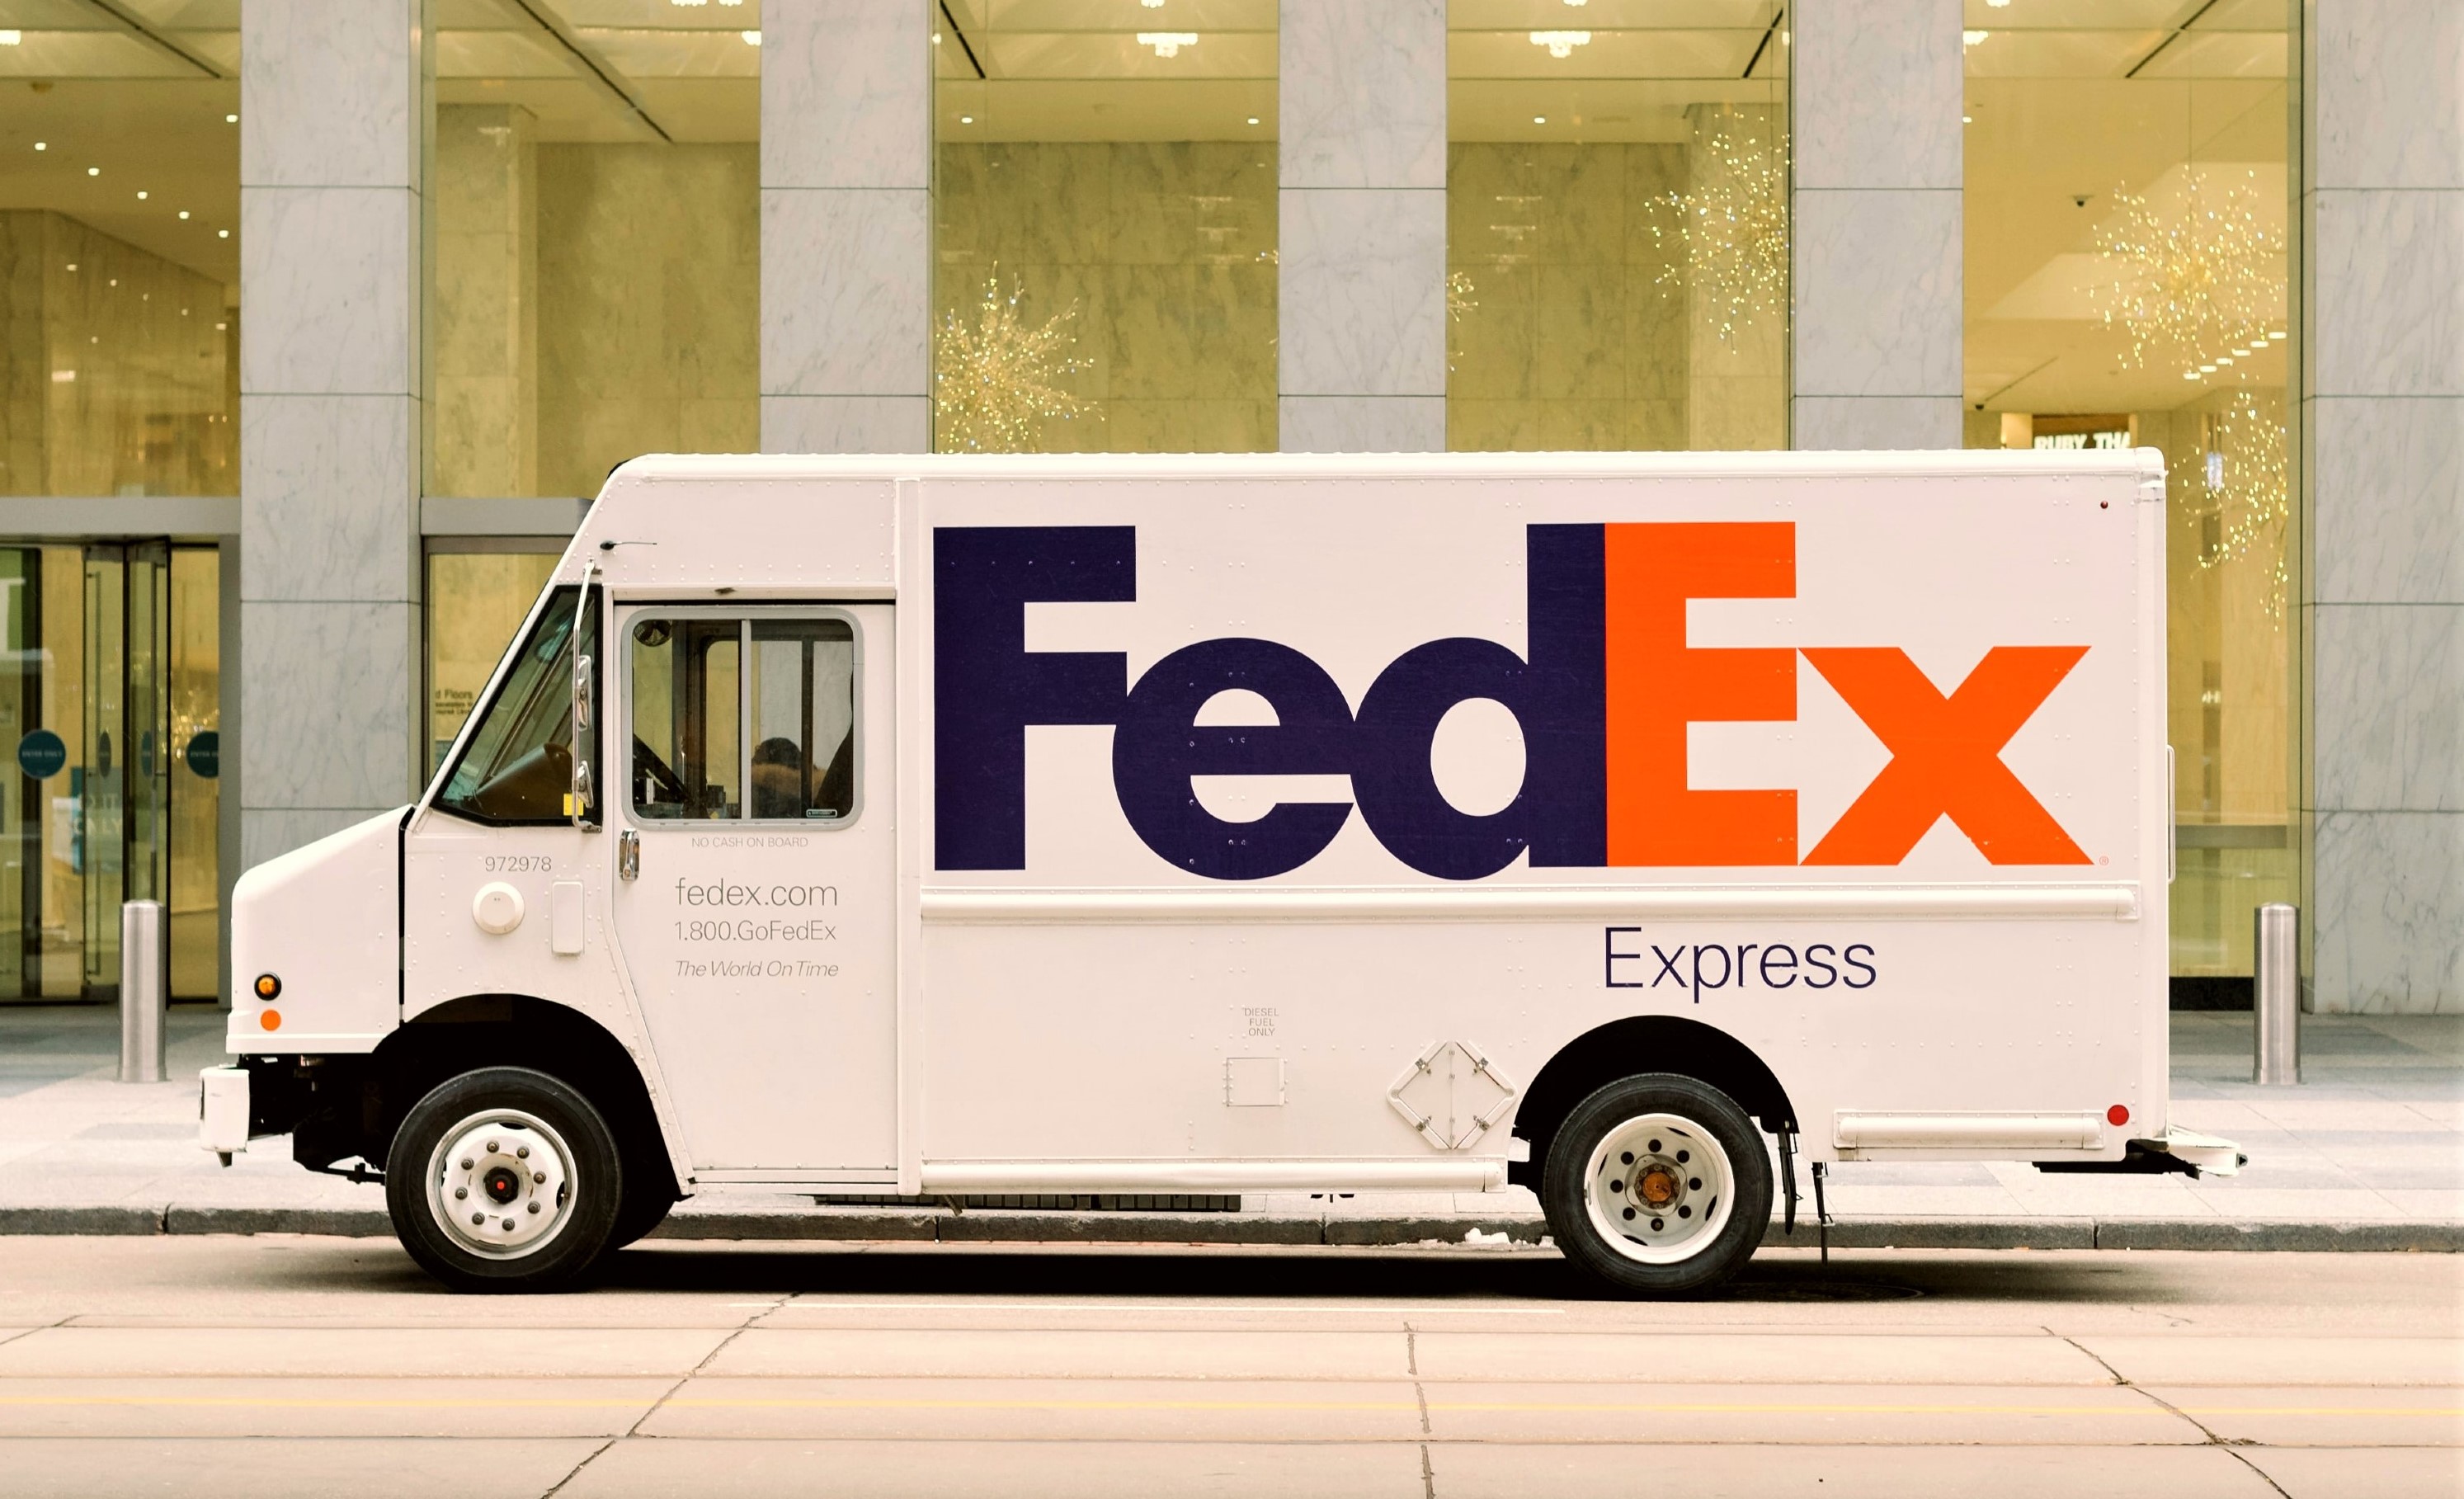 Stock to watch this week: FedEx